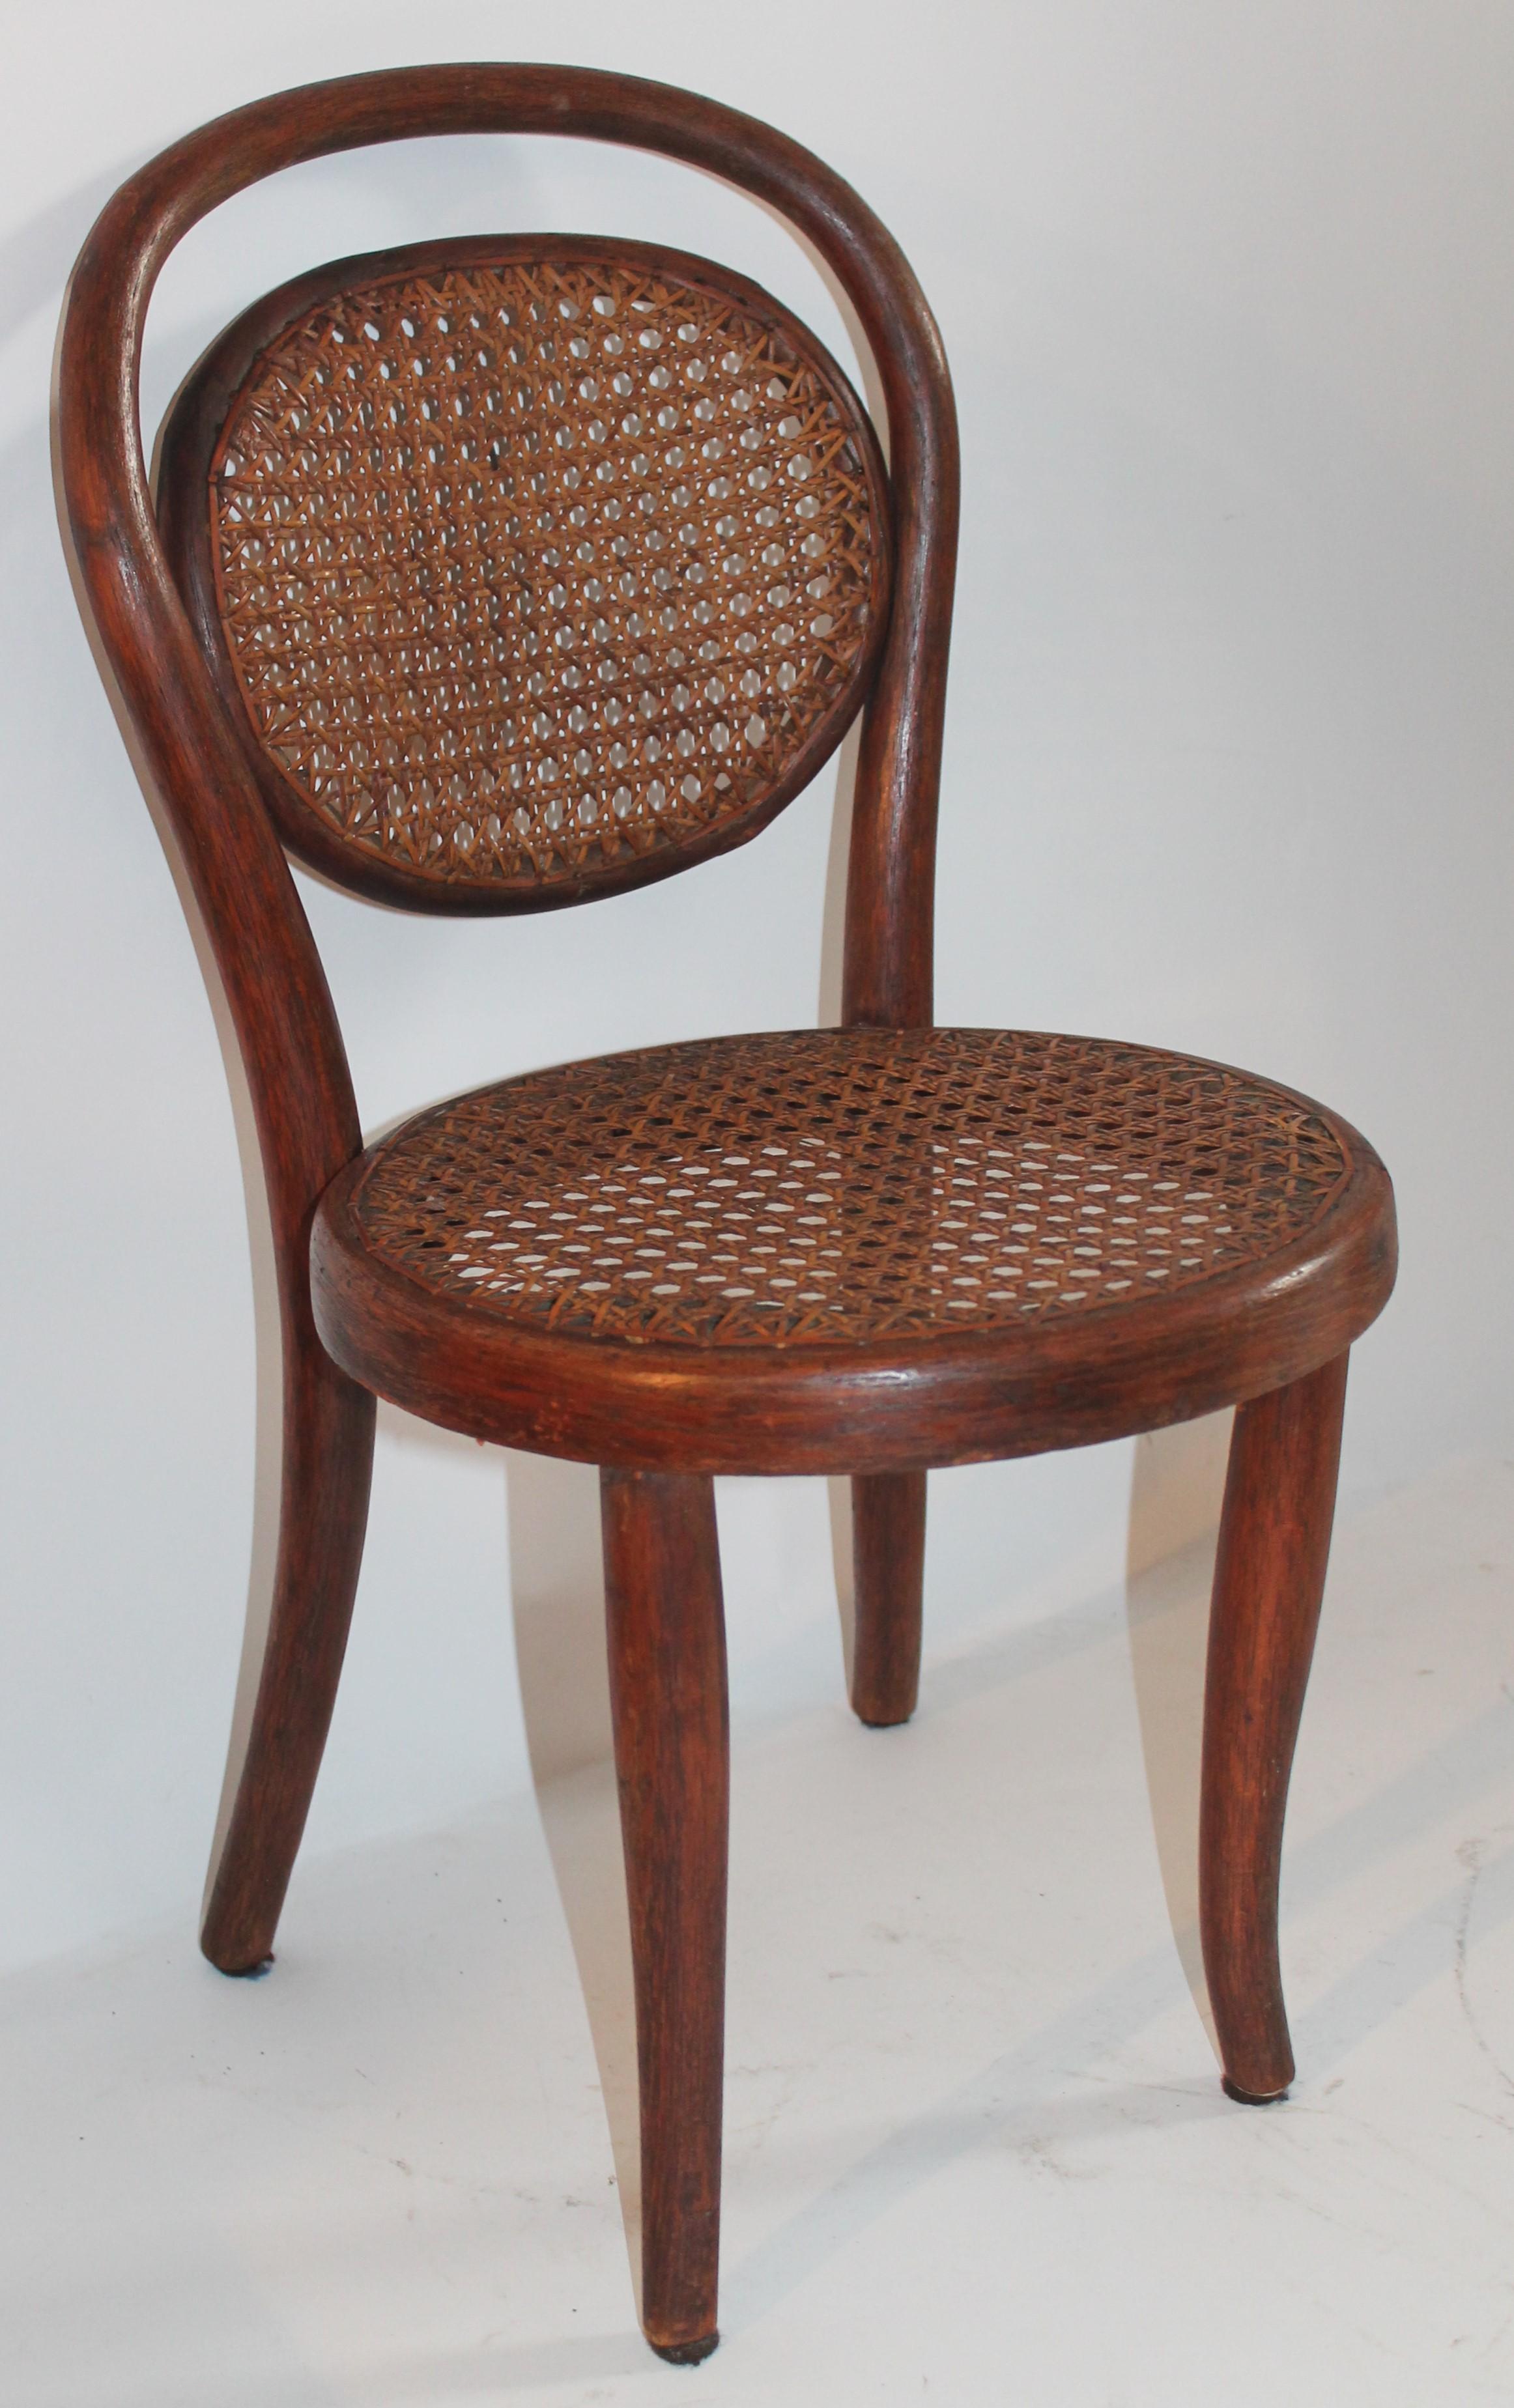 Bentwood Rocker and Chair with Cane Seats, 19th Century For Sale 3